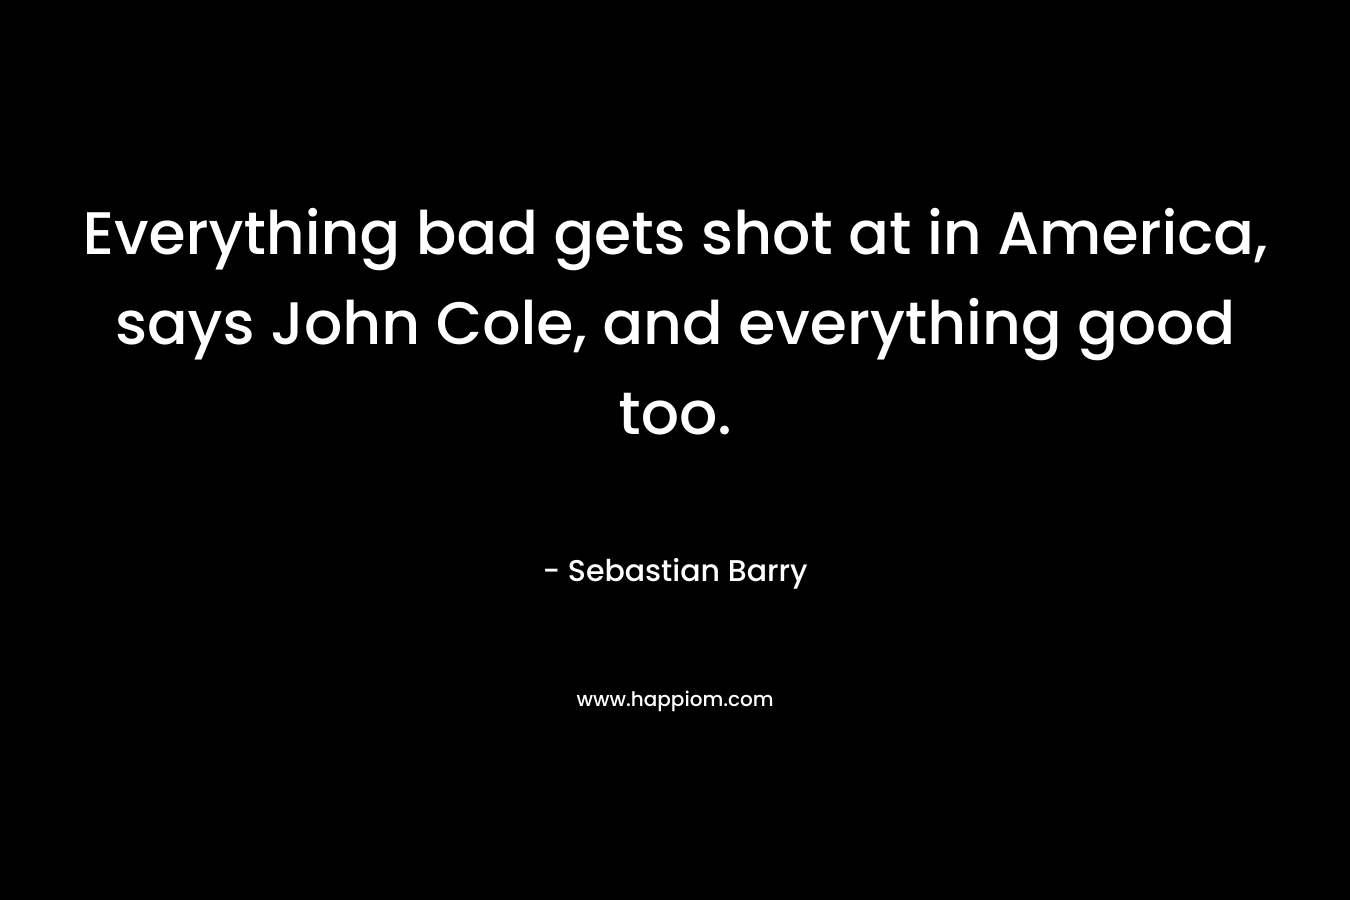 Everything bad gets shot at in America, says John Cole, and everything good too. – Sebastian Barry